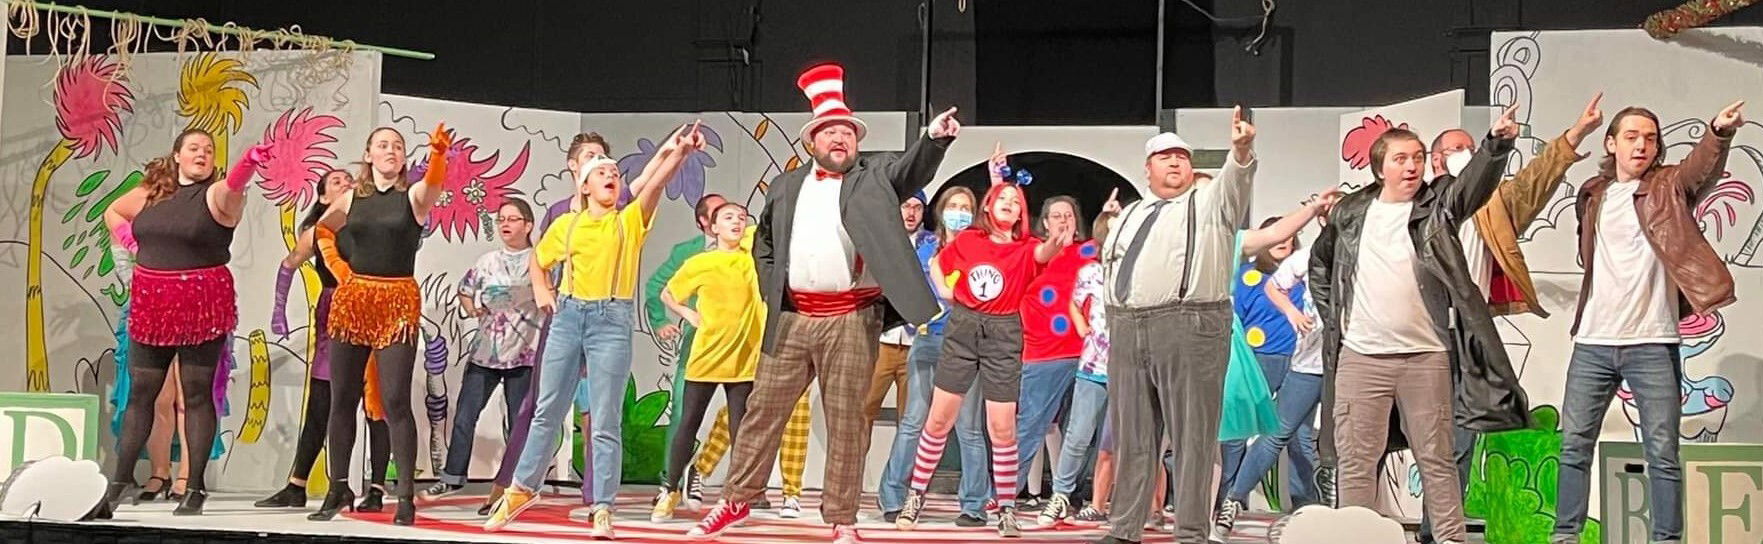 "Seussical the Musical" by Lynn Ahrens and Stephen Flaherty - Barre Players (Barre, MA.) - REVIEW